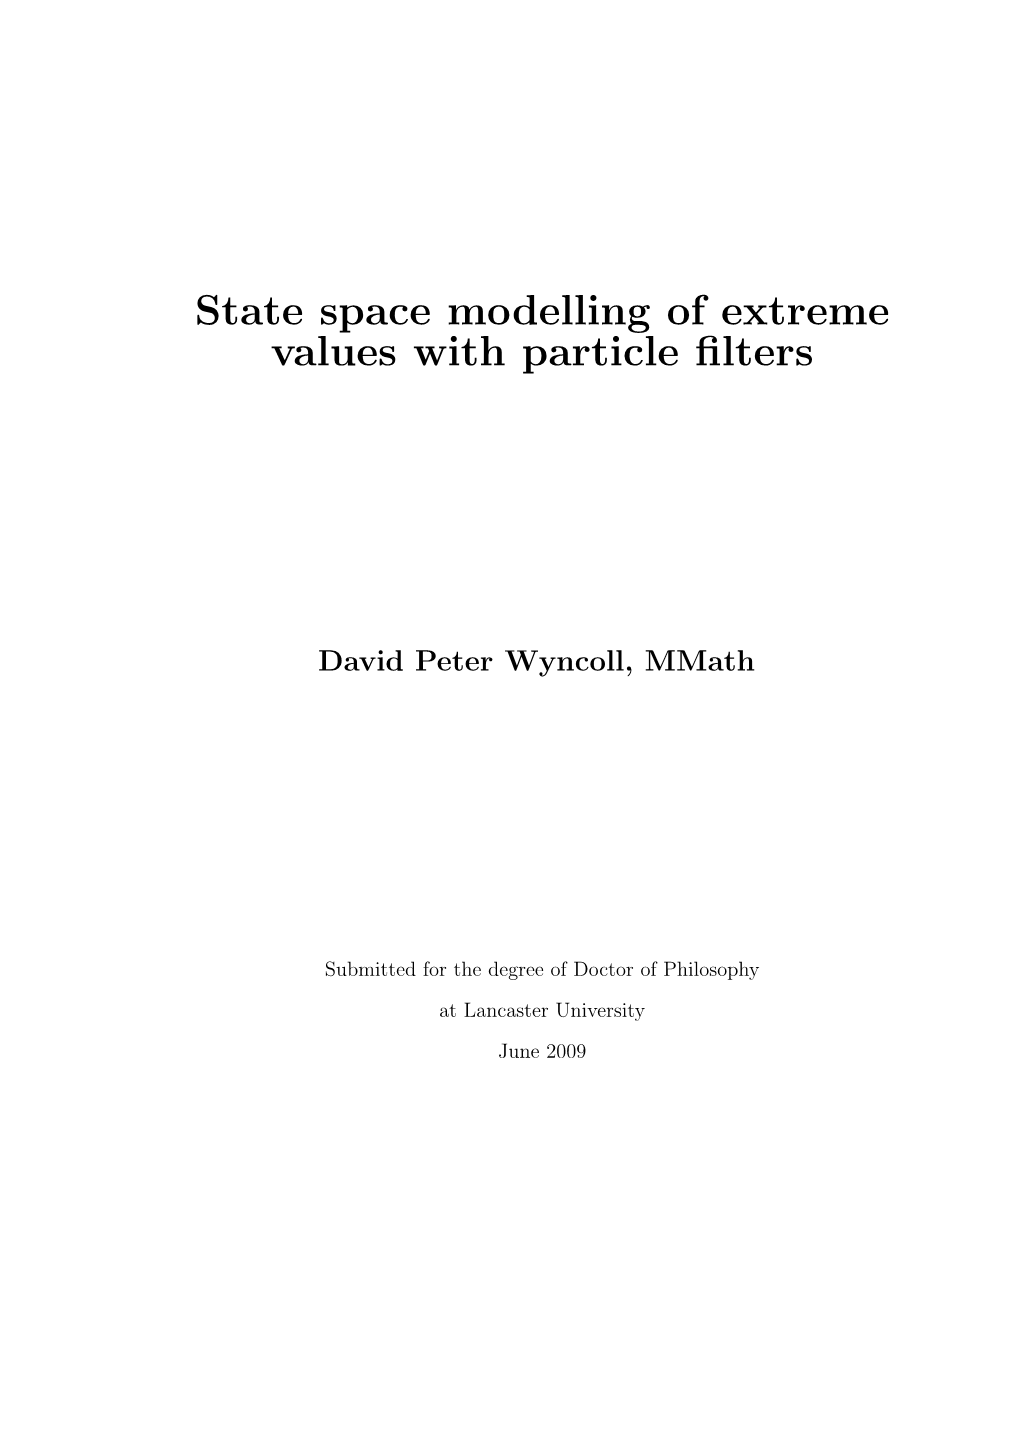 State Space Modelling of Extreme Values with Particle Filters